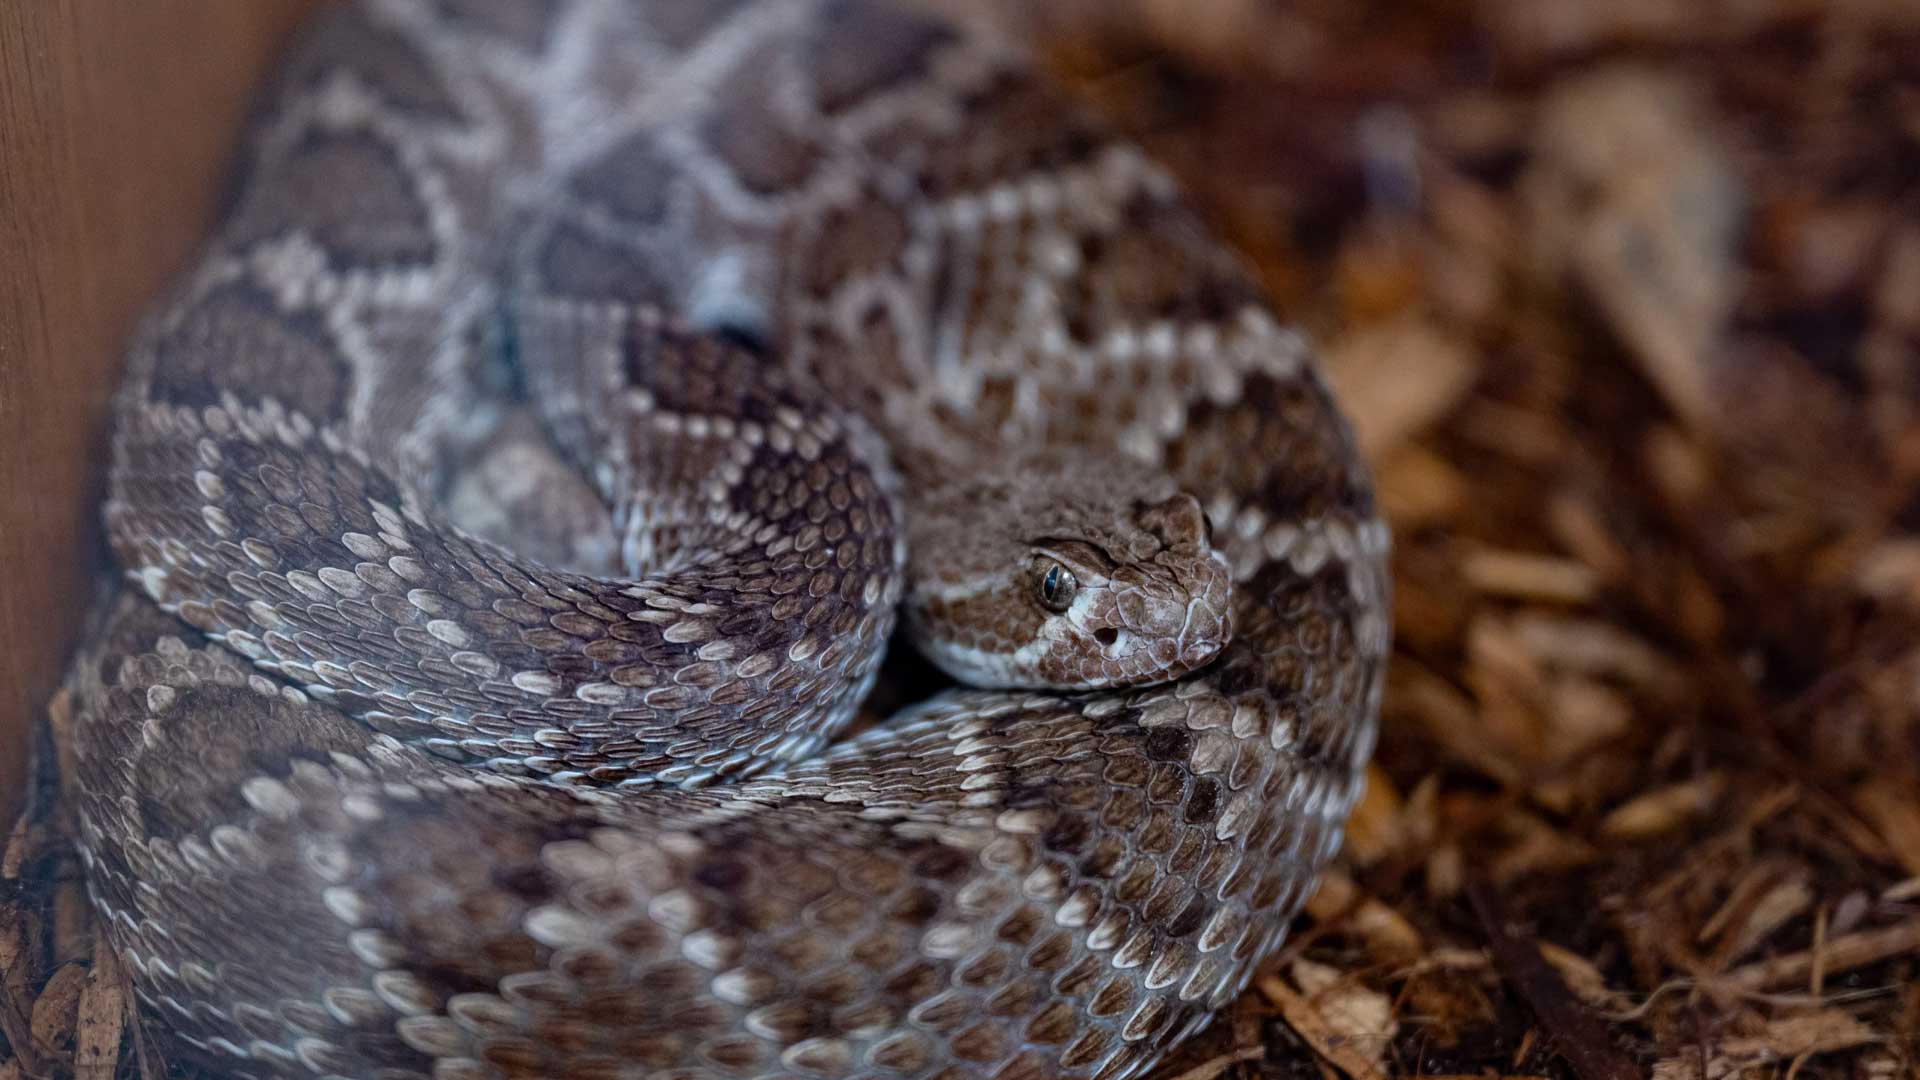 A Mojave rattlesnake under the care of the Phoenix Herpetological Society at the Florence Ely Nelson Desert Park in Scottsdale, Arizona.
